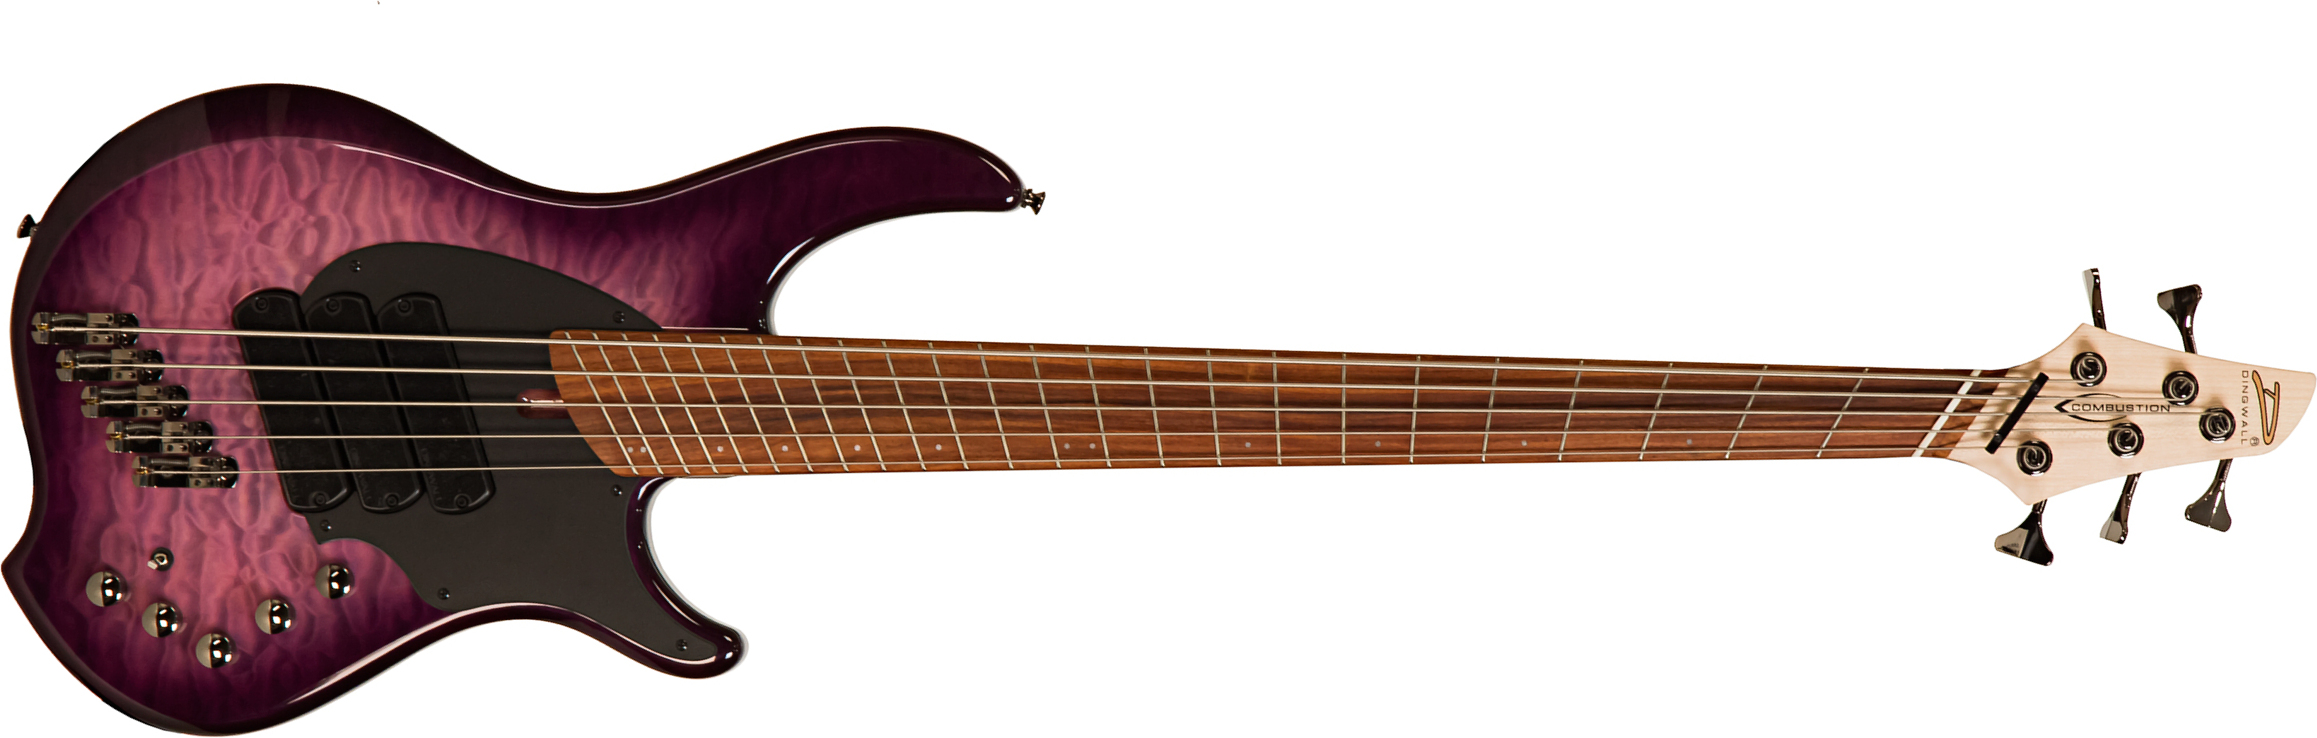 Dingwall Combustion Cb3 5c 3pu Active Pf - Ultra Violet Gloss - Solid body electric bass - Main picture